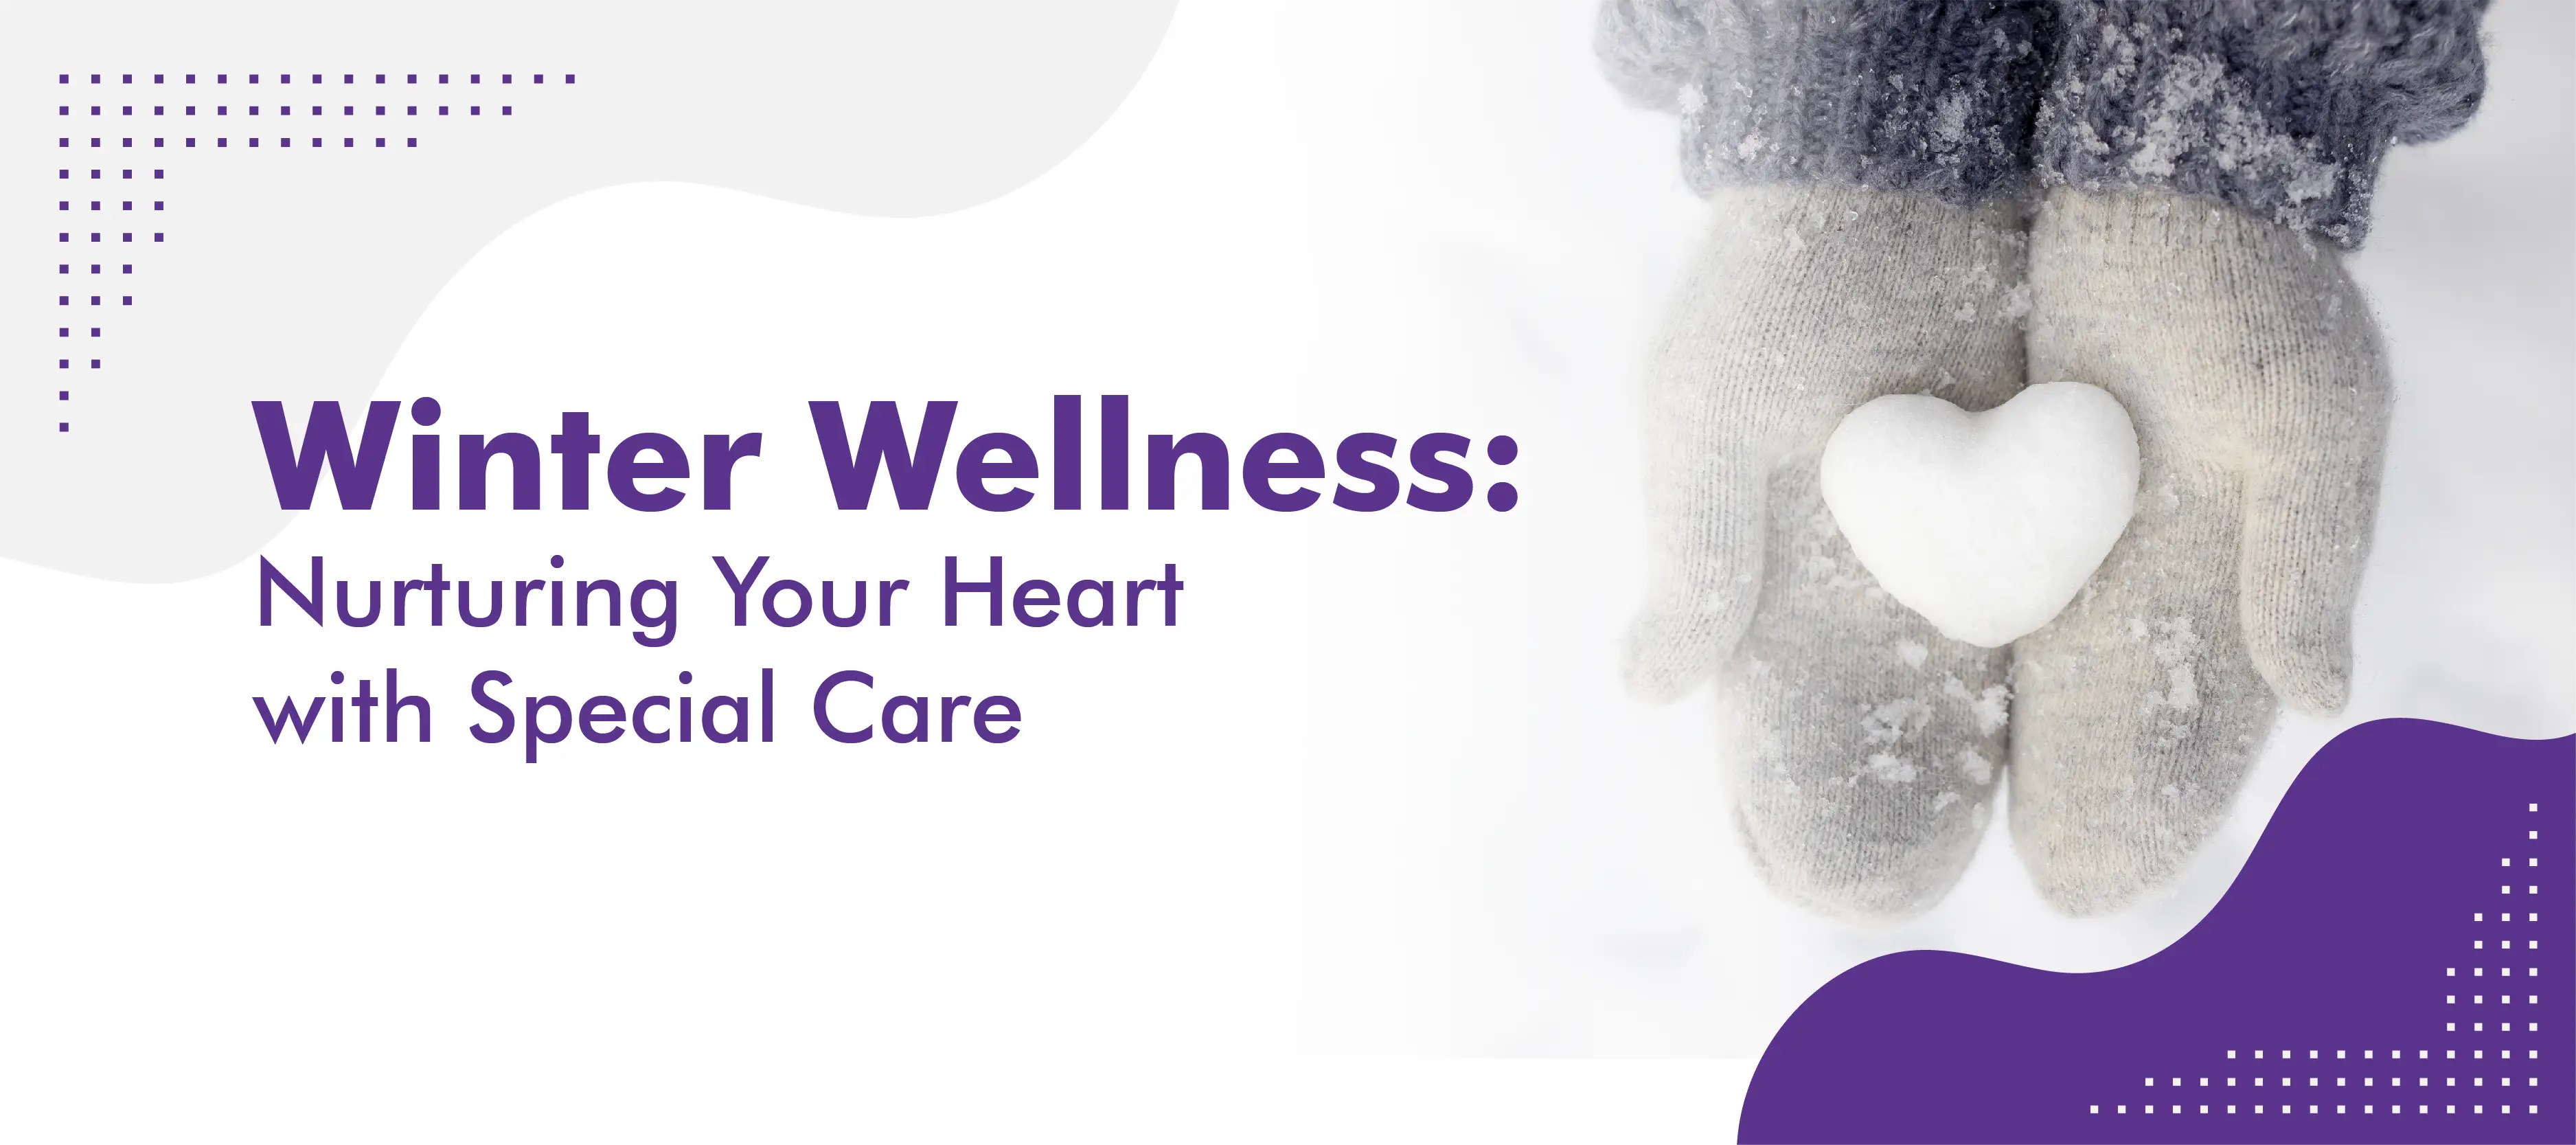 Winter Wellness: Nurturing Your Heart with Special Care